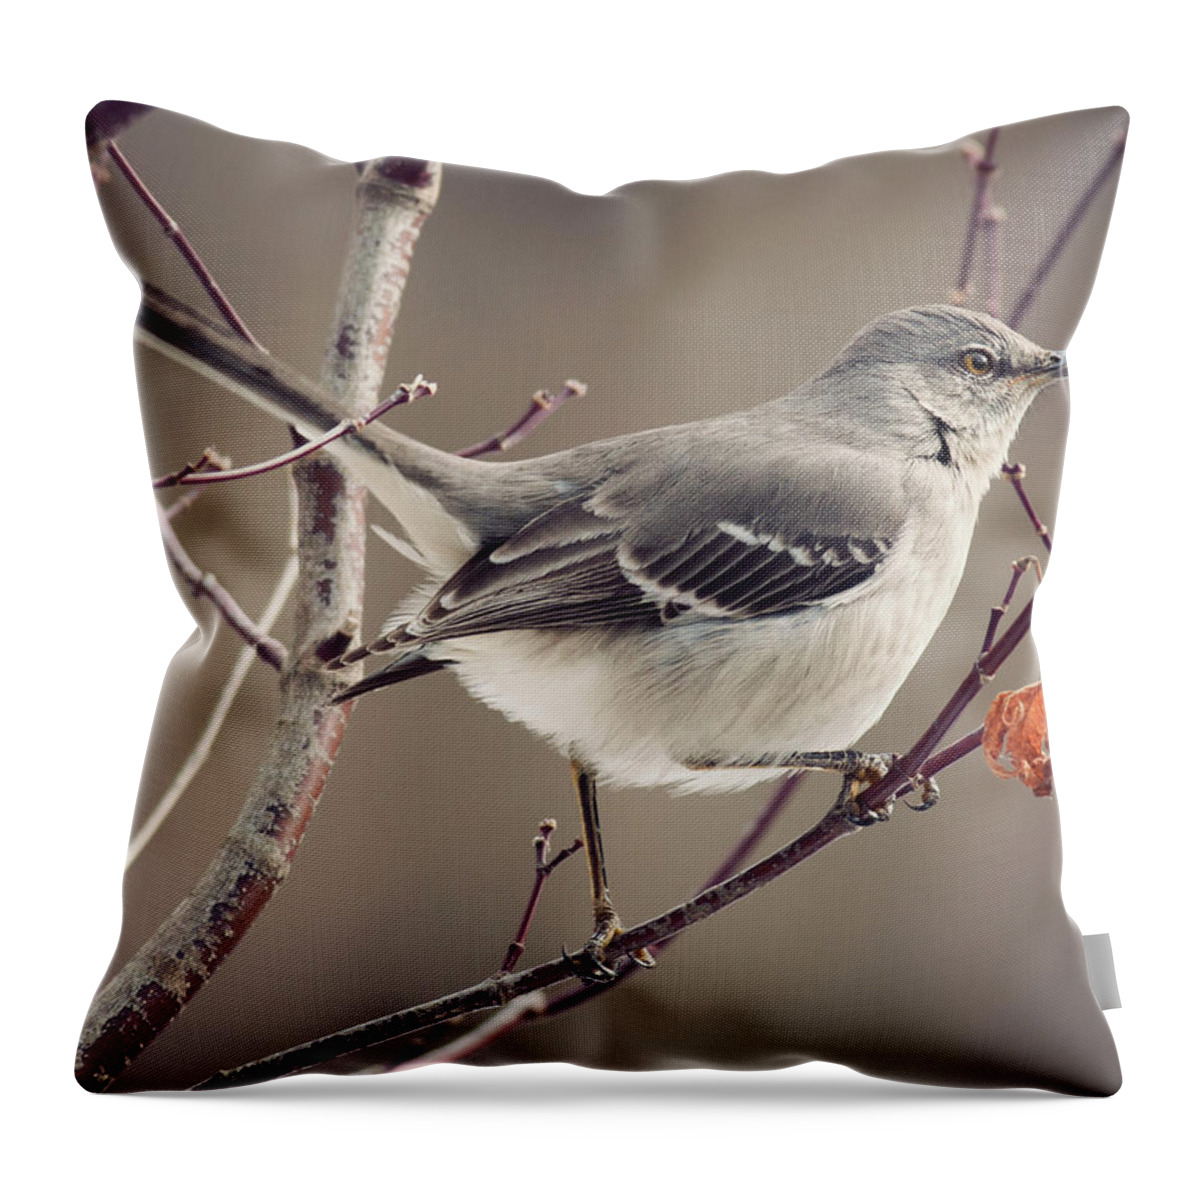 Animal Themes Throw Pillow featuring the photograph Small Miracles by Jody Trappe Photography